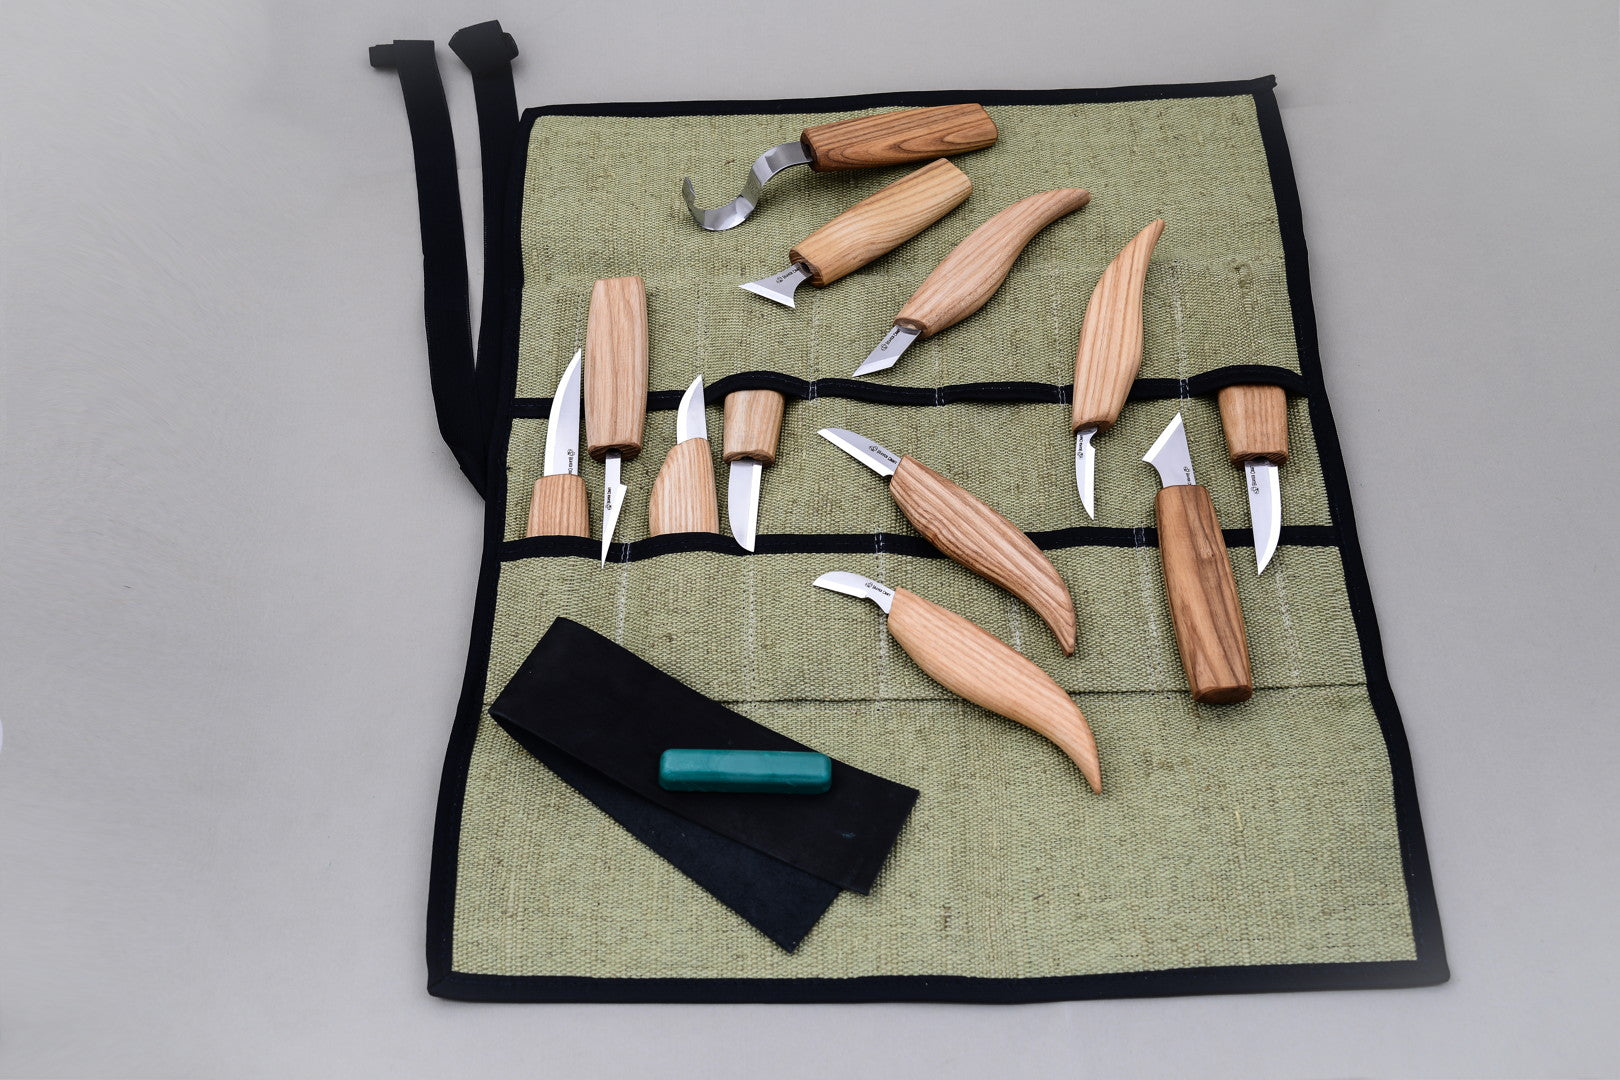 S70L – Extended Wood Carving Set of Knives, Chisels, Gouges, and Sharpening  Accessories in a Tool Holder (left-handed)